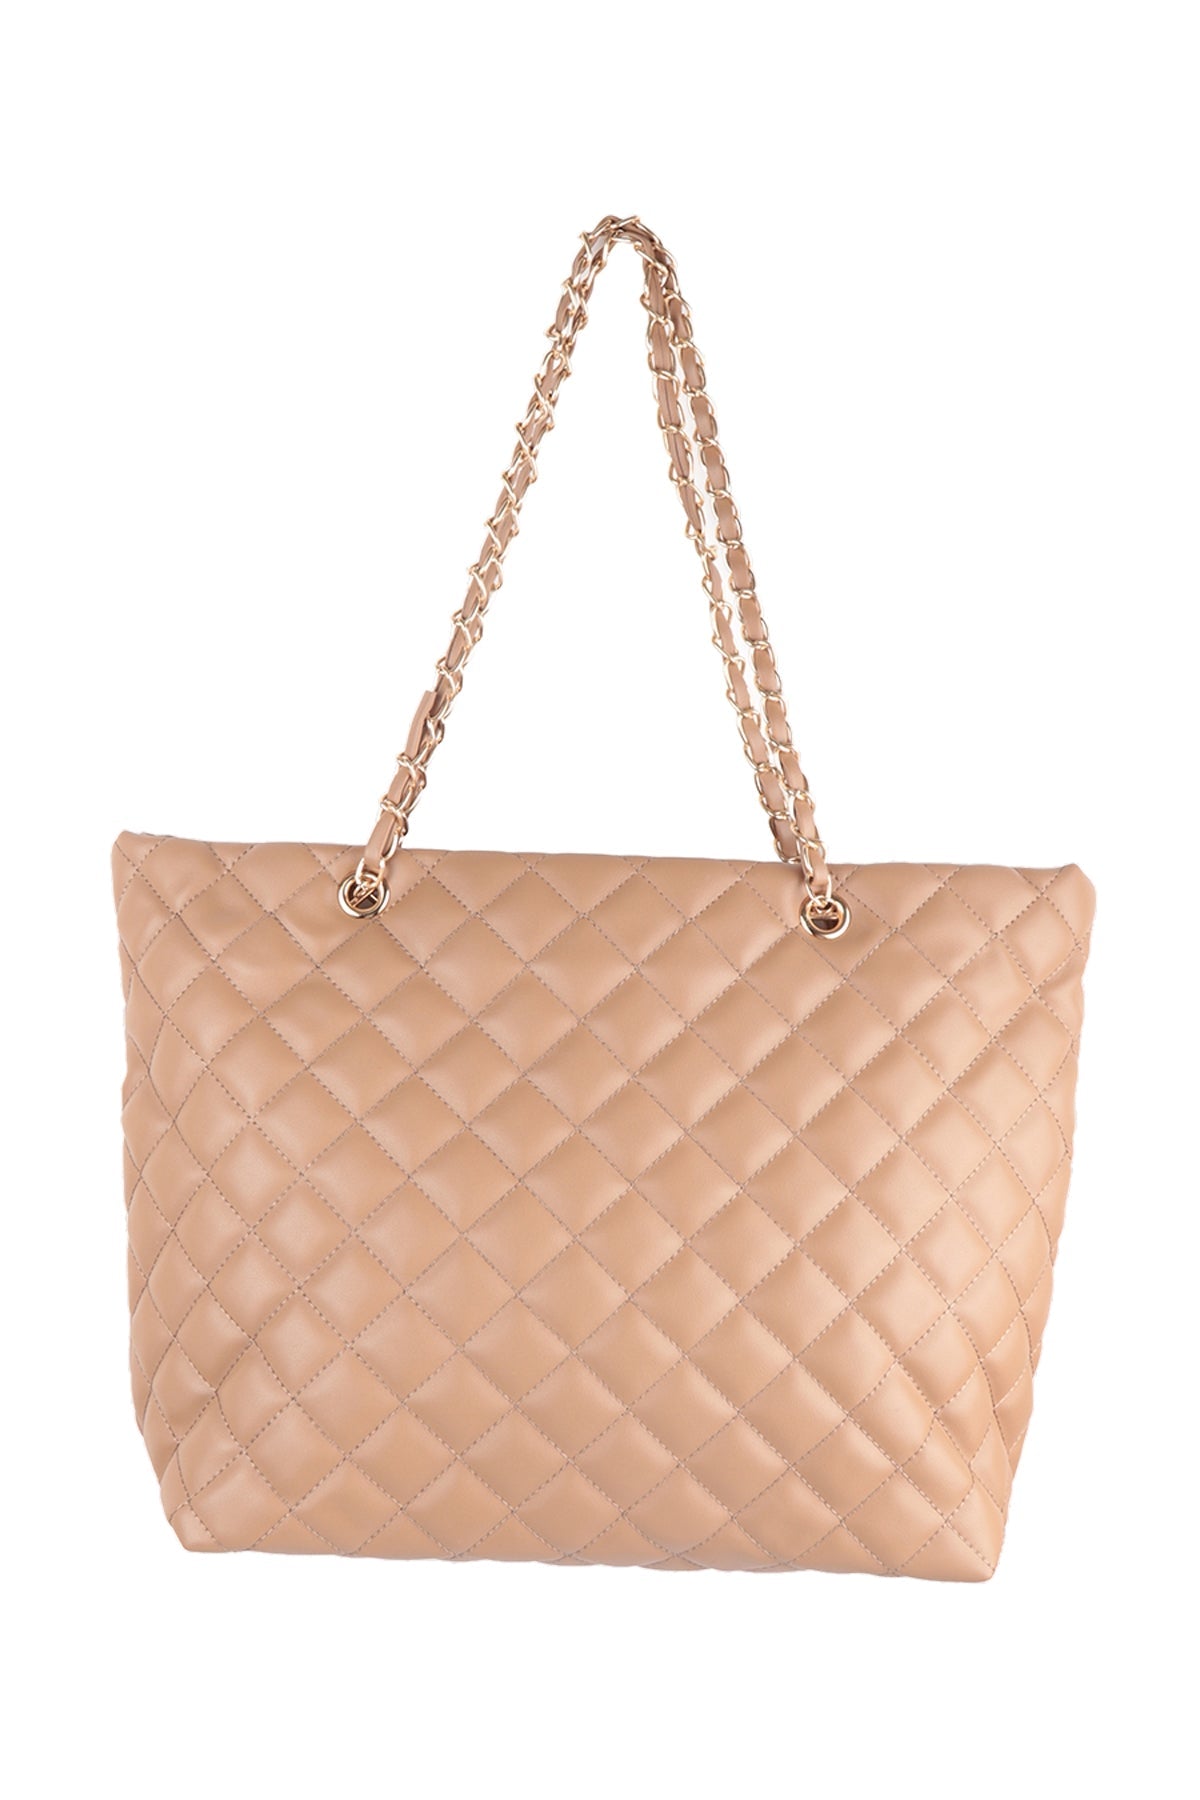 Quilted diamond pattern, leather handbag with chain and leather handle. H: 10" W: 12" DL: 6" D: 10"